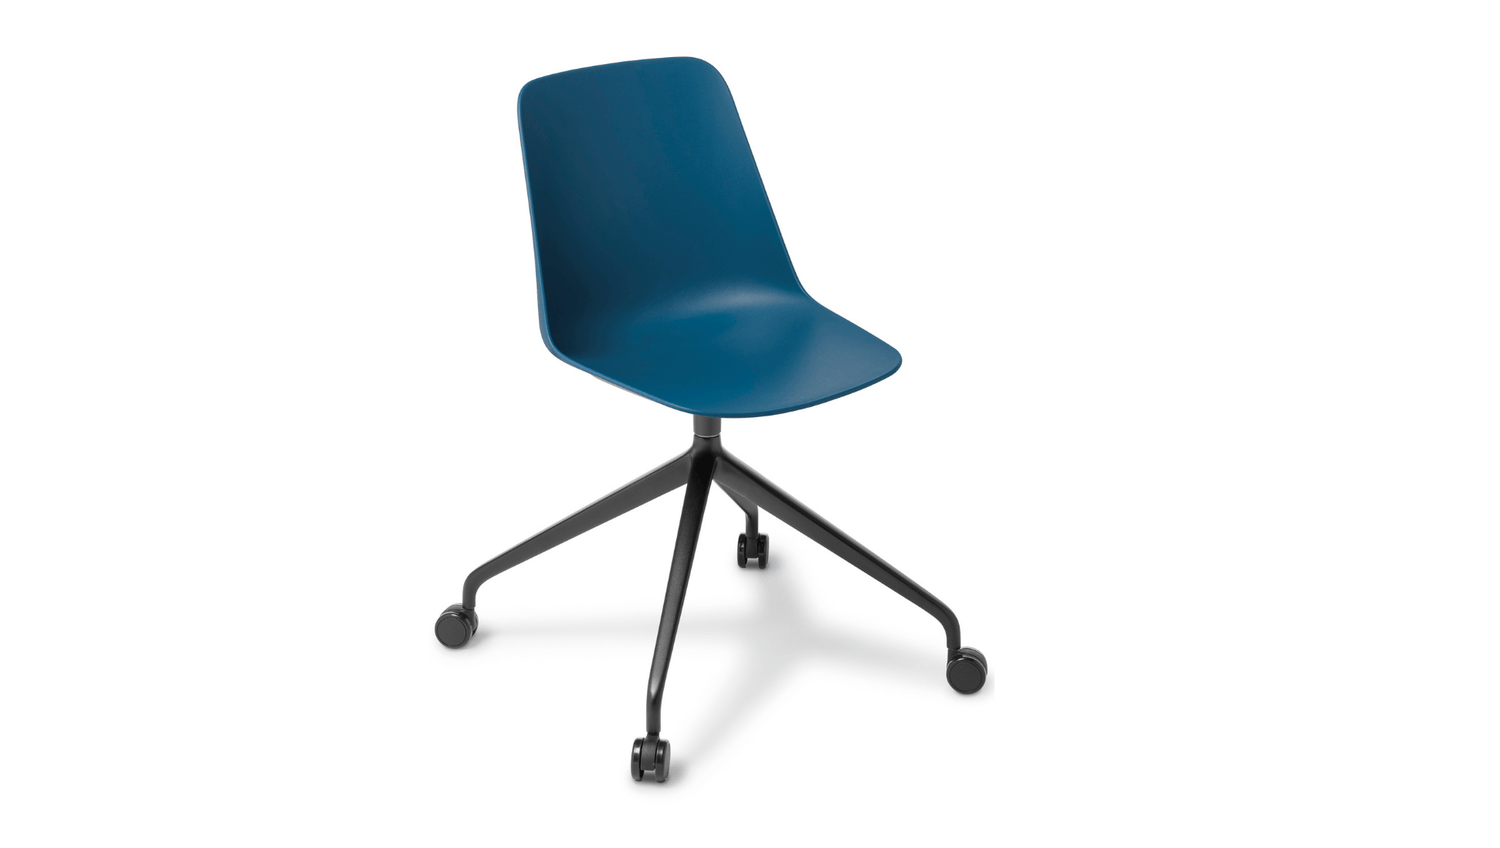 Seating Standard Seat / 4 Star Black Powder coated Castor base / Classic Blue Max Chair